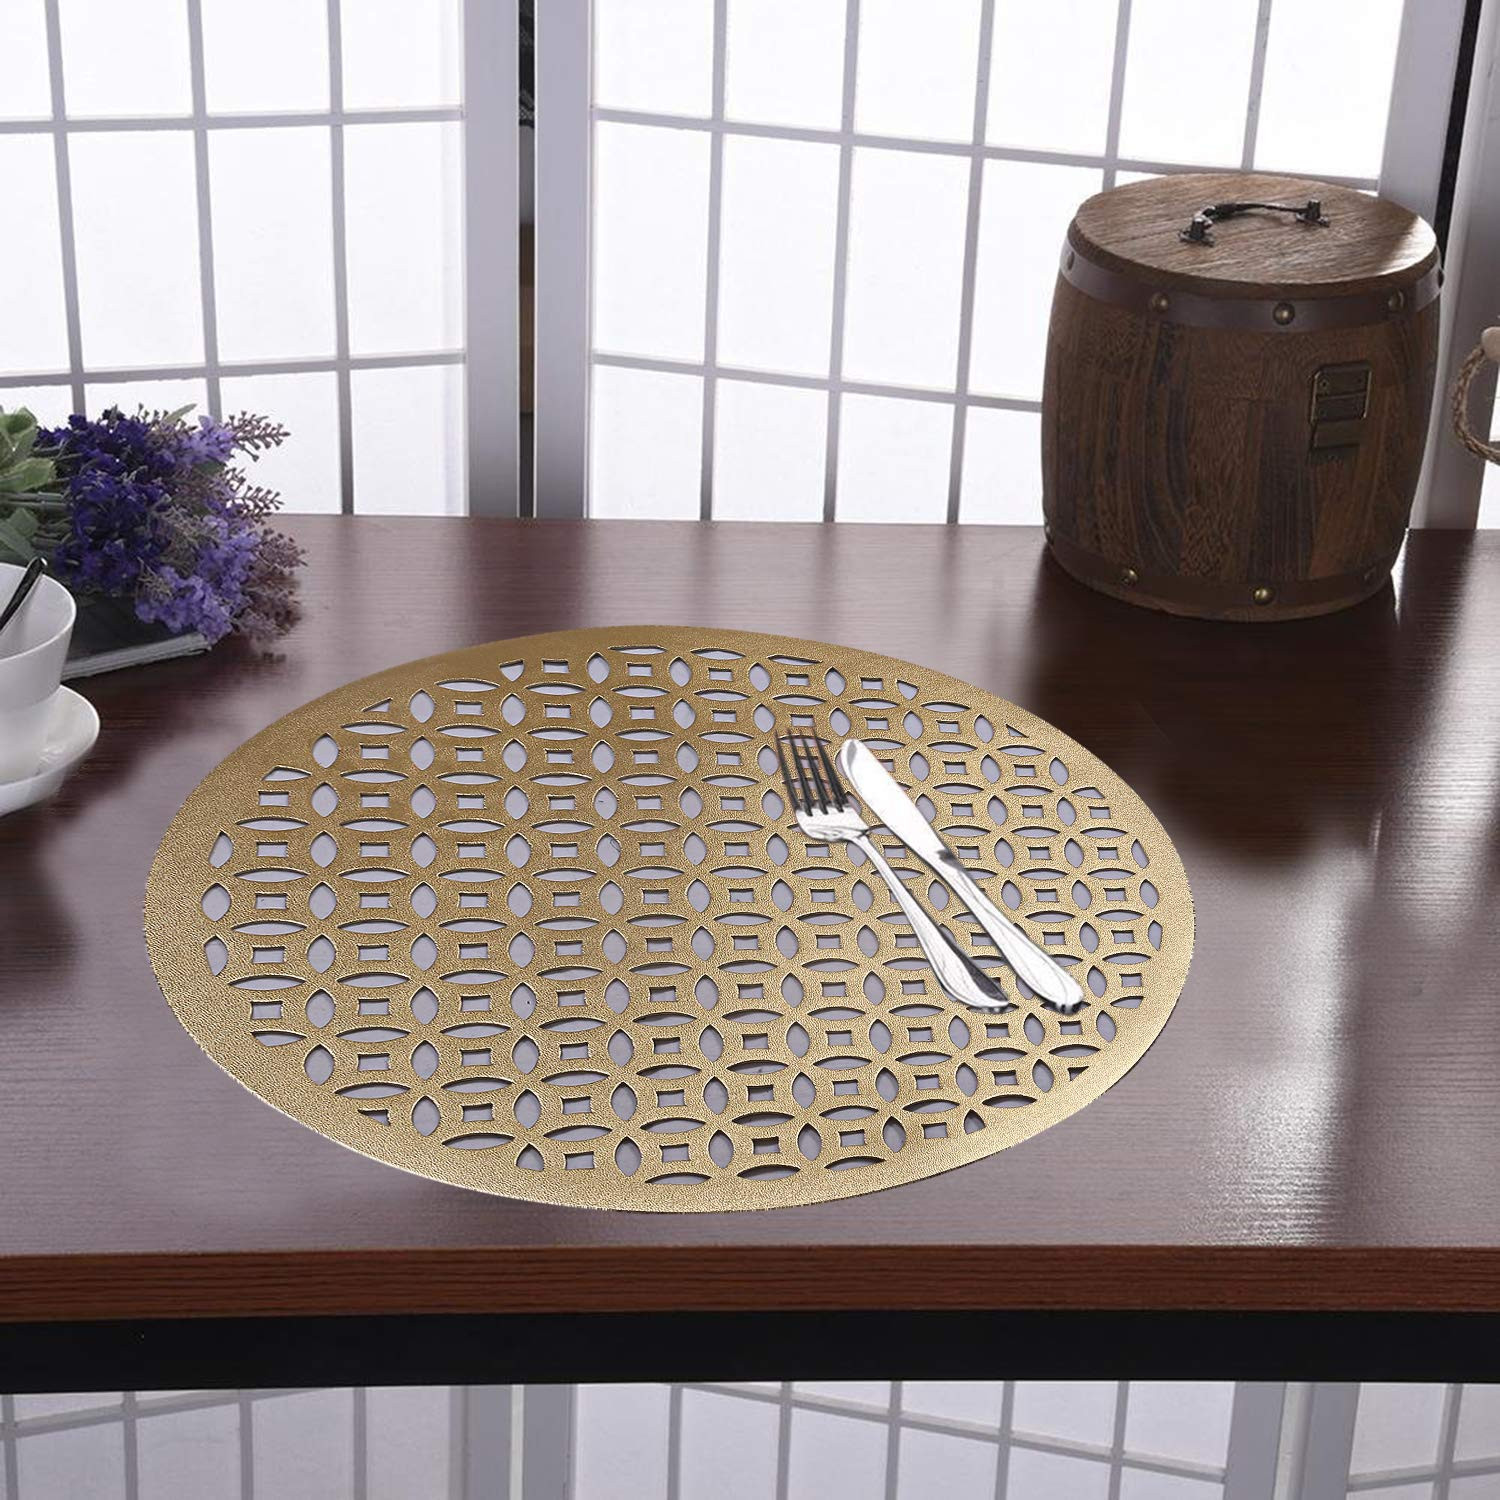 Kuber Industries Rounded Soft Leather Table Placemats, Set of 4 (Gold)